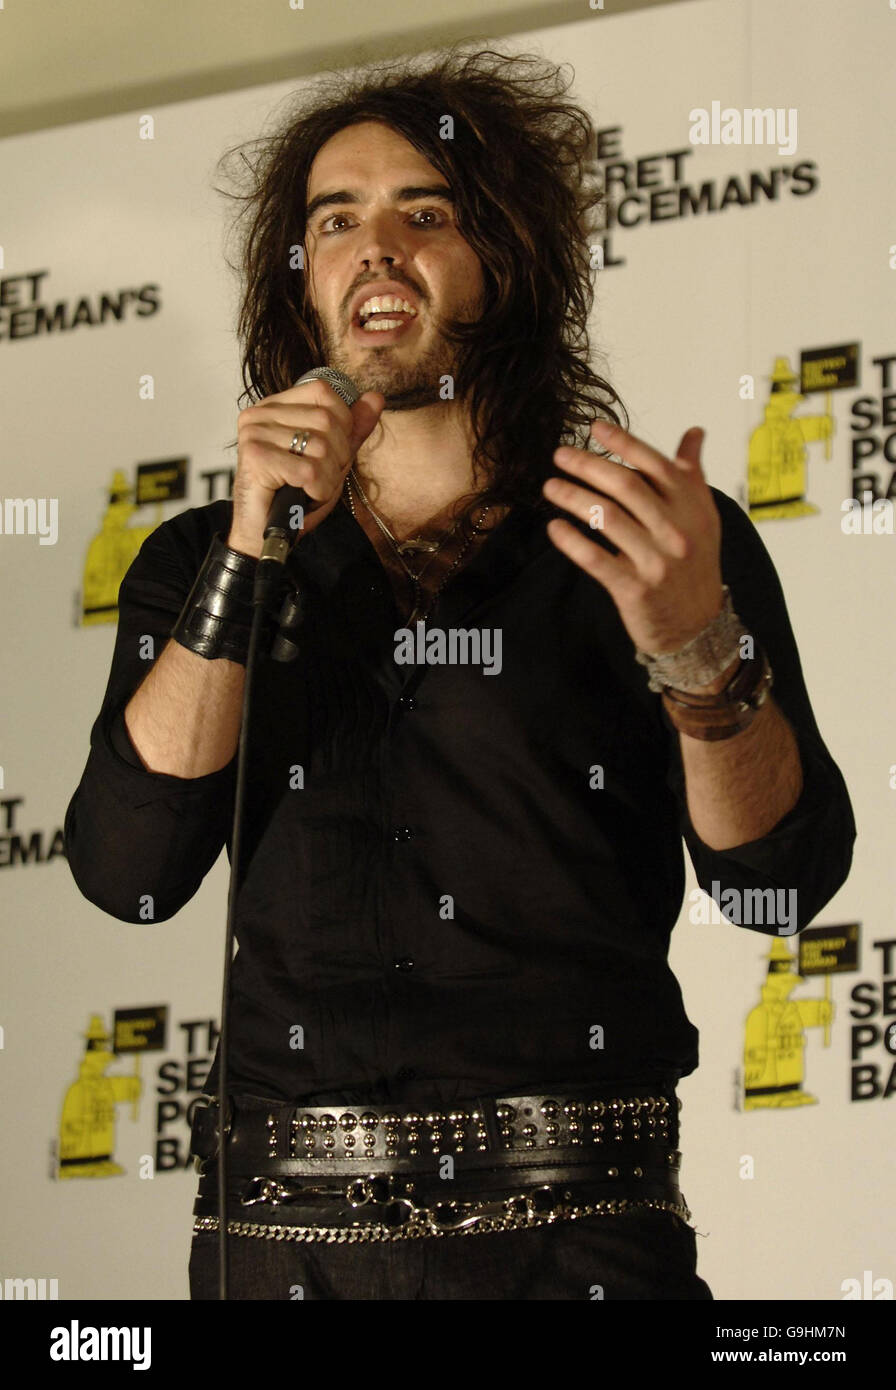 Russell Brand is photographed at The Secret Policeman's Ball concert - which launches Amnesty International's 'Protect The Human Week' - at The Royal Albert Hall in London. Stock Photo